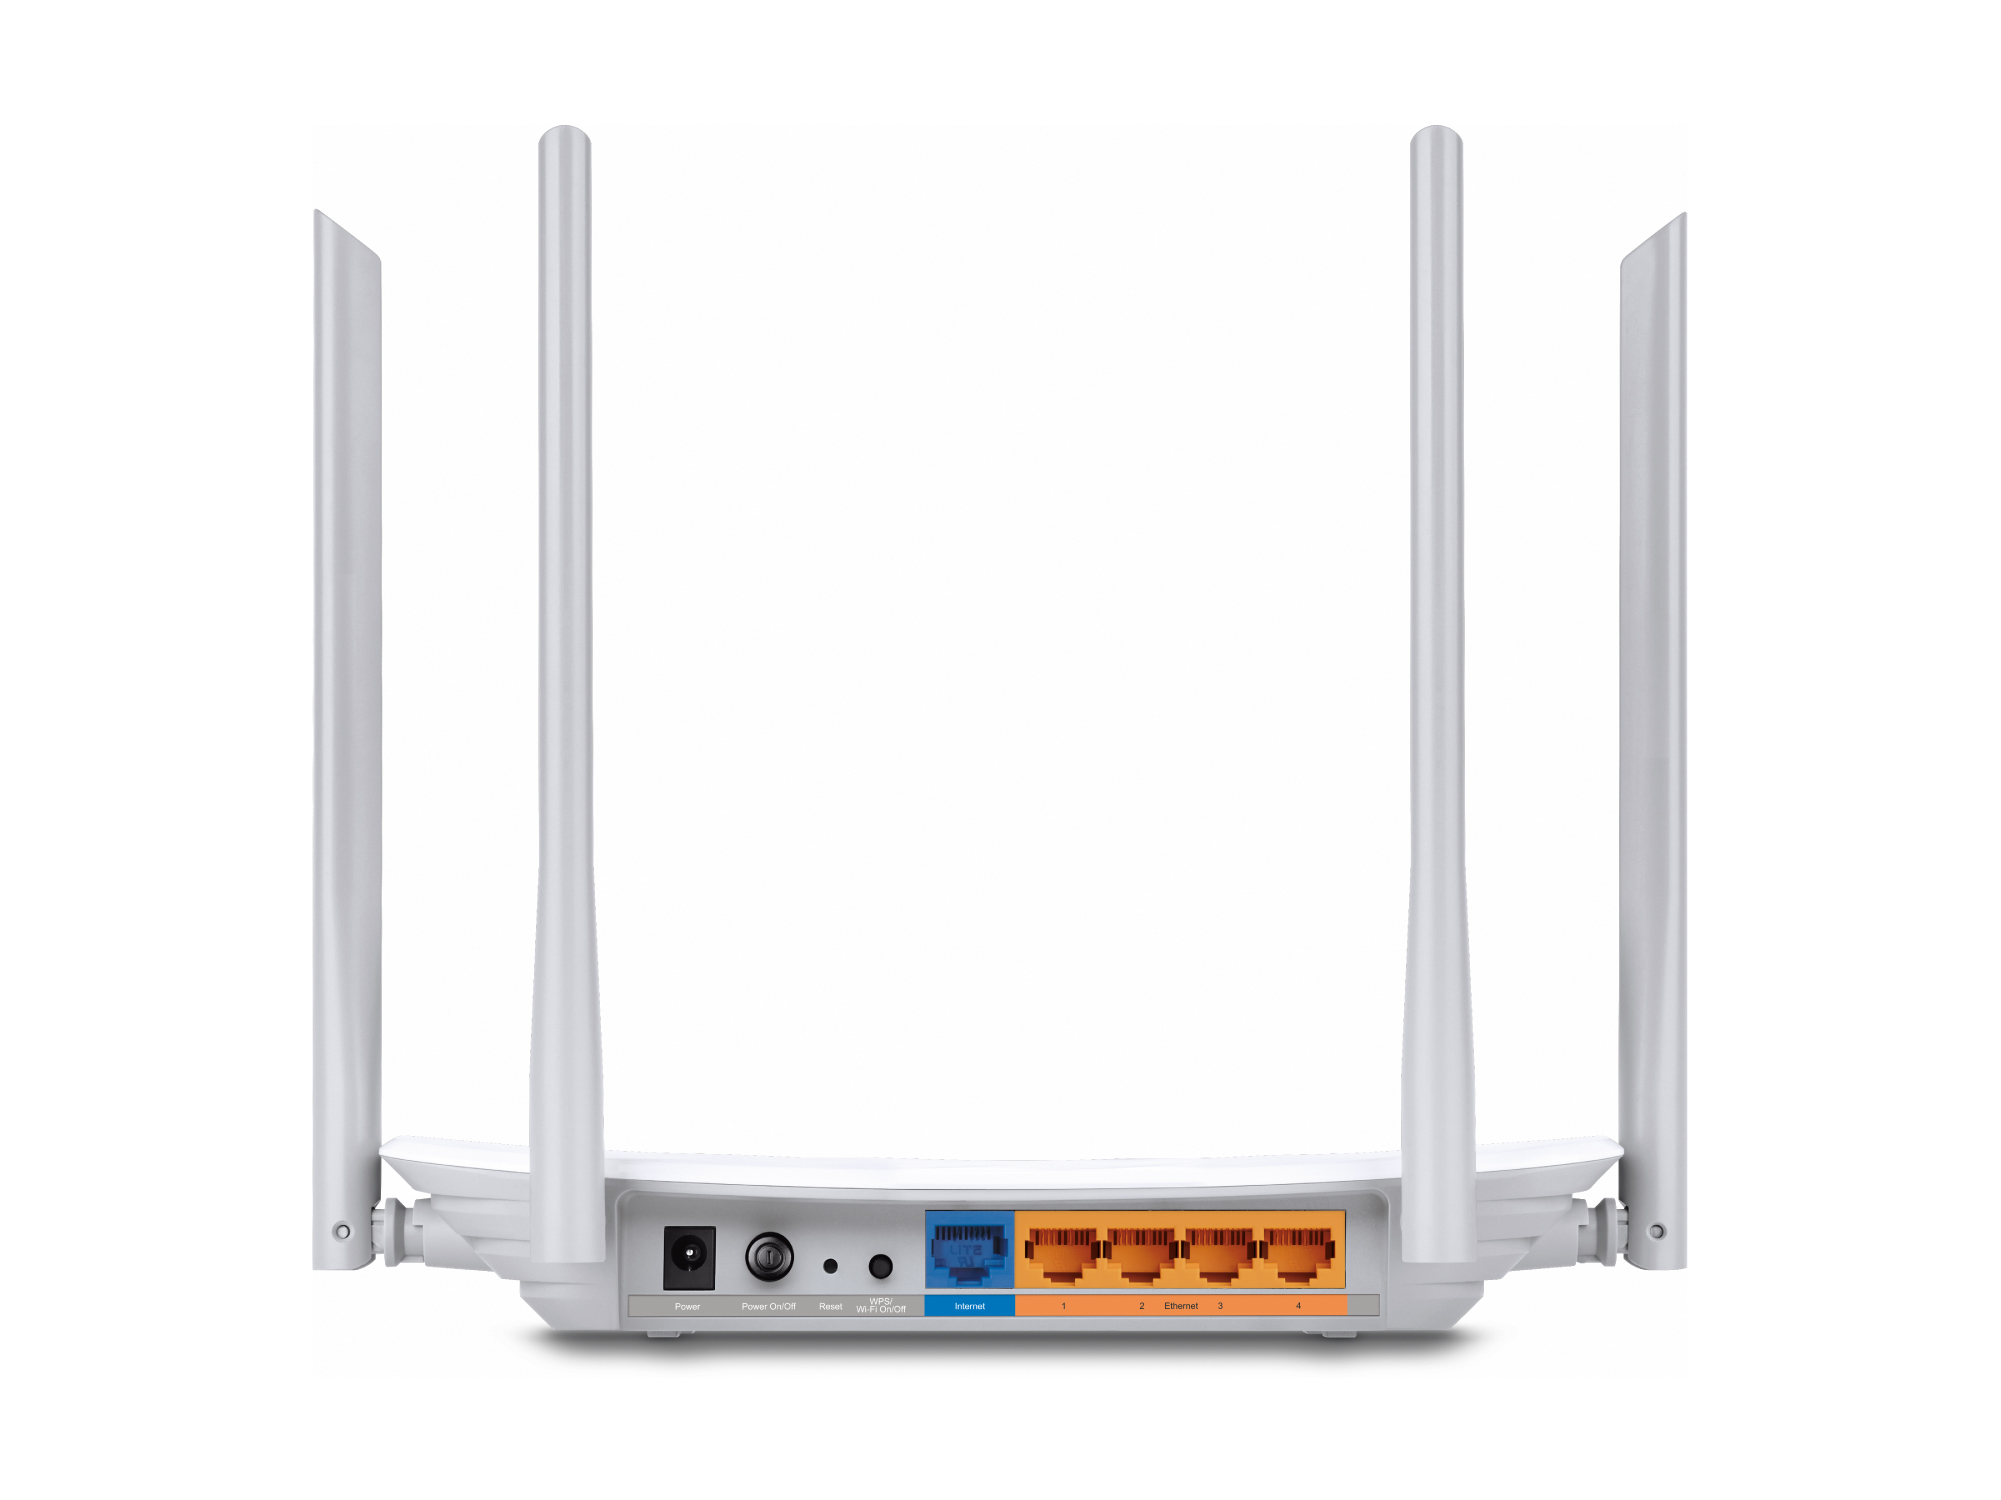 TP-Link Archer C50 V4 AC1200 WiFi DualBand Router1 